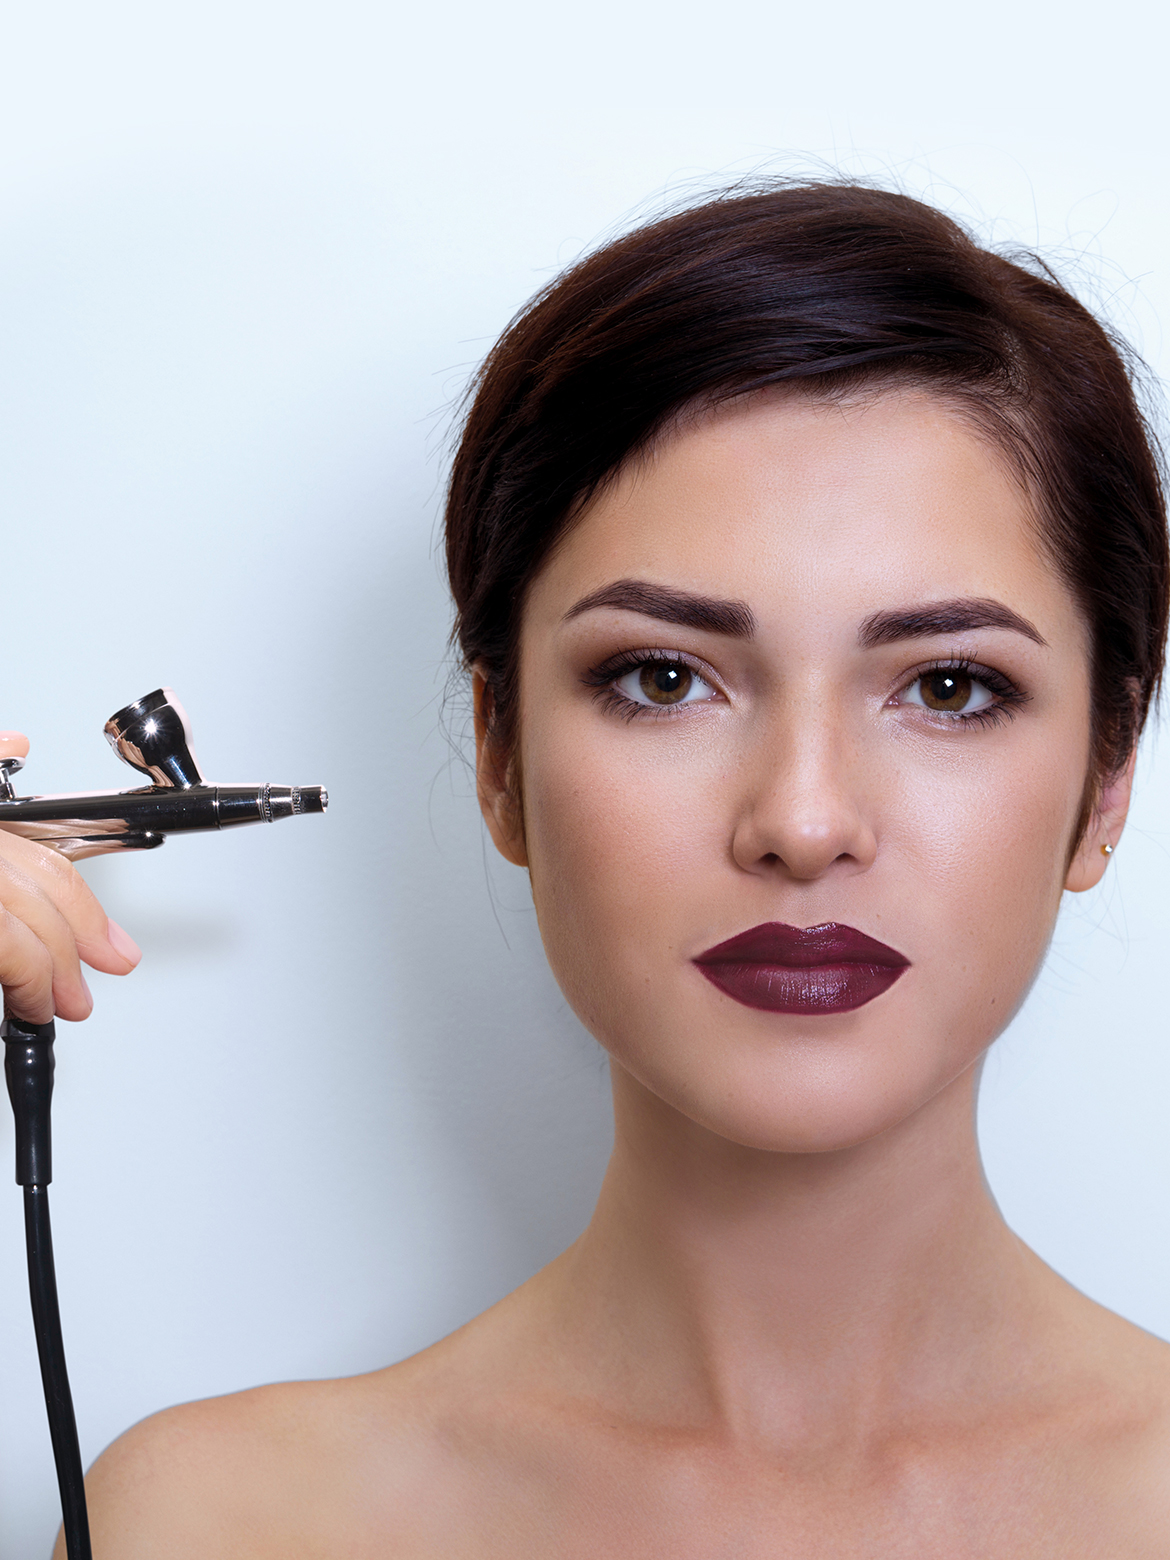 Everything You Need To Know About Airbrush Makeup